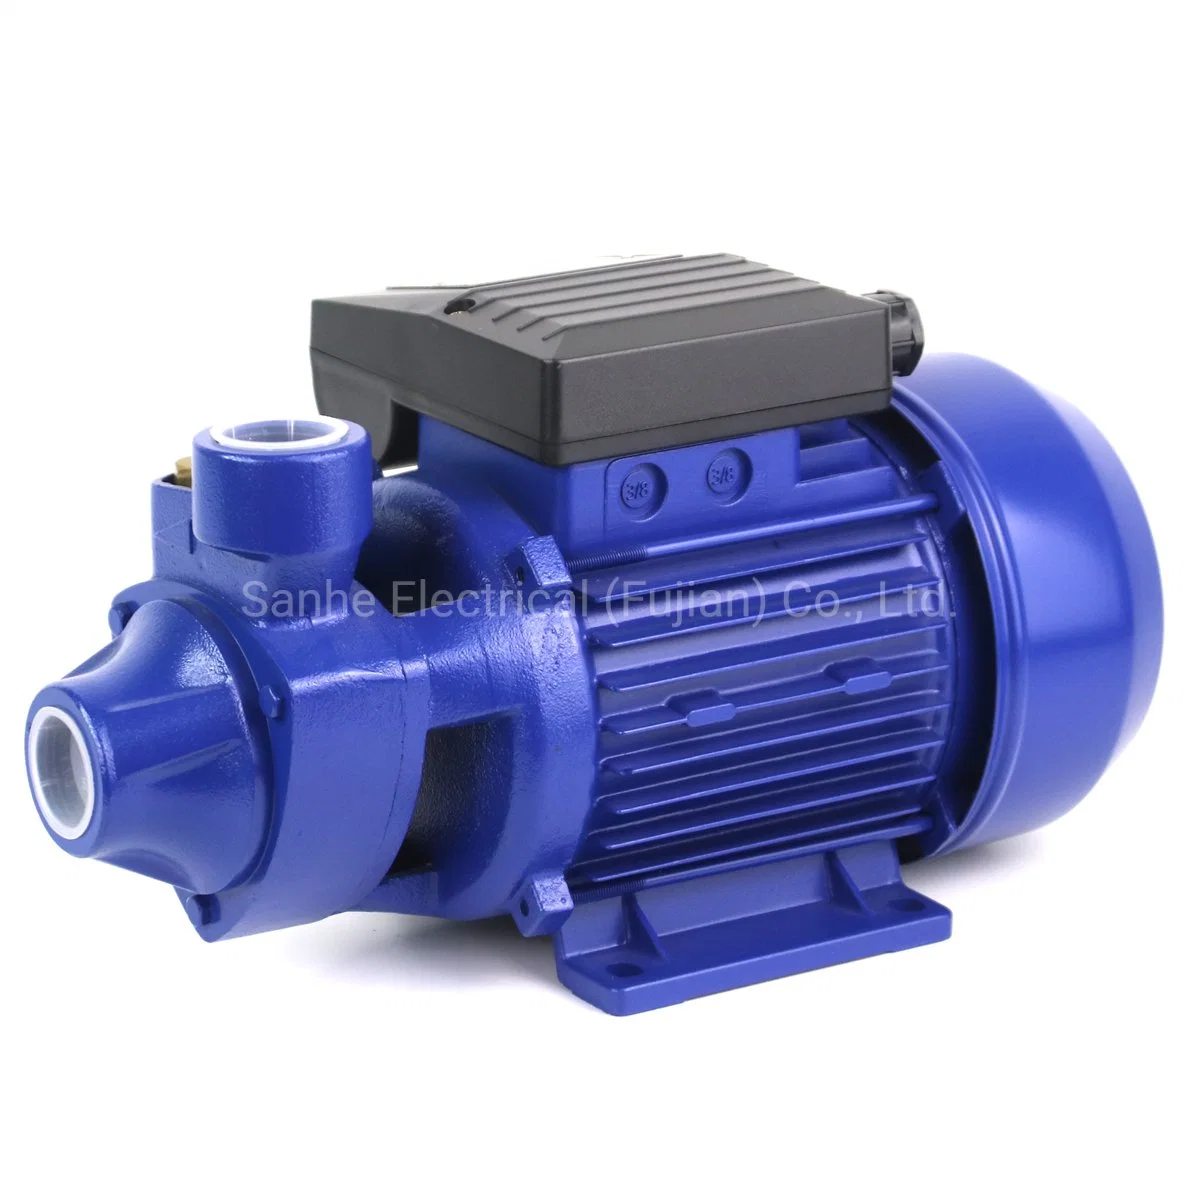 Sanhe Qb Series Vortex Pump High Pressure Booster Pump Motor Surface Water for Household Use